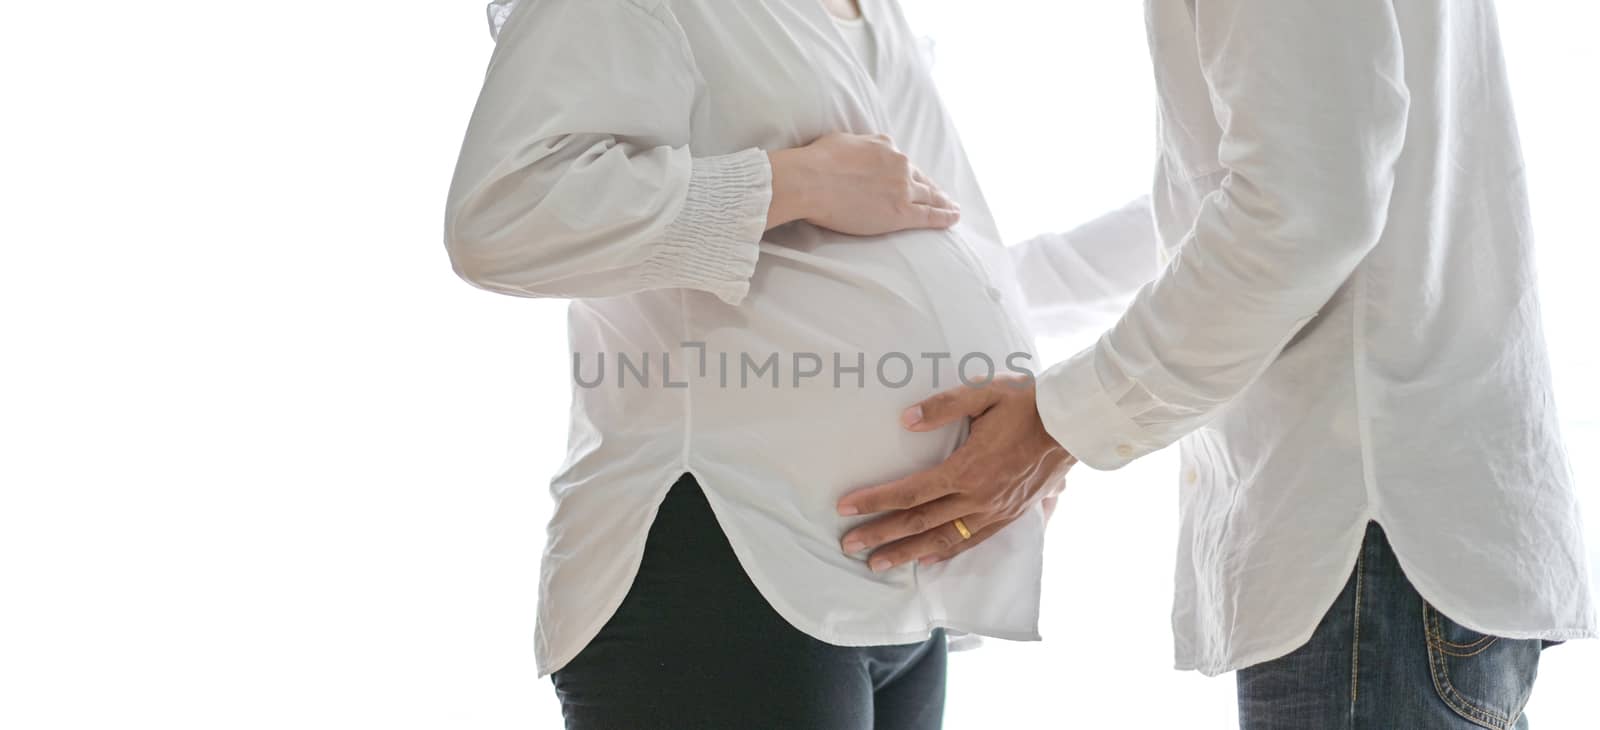 Men standing and embrace pregnant women.